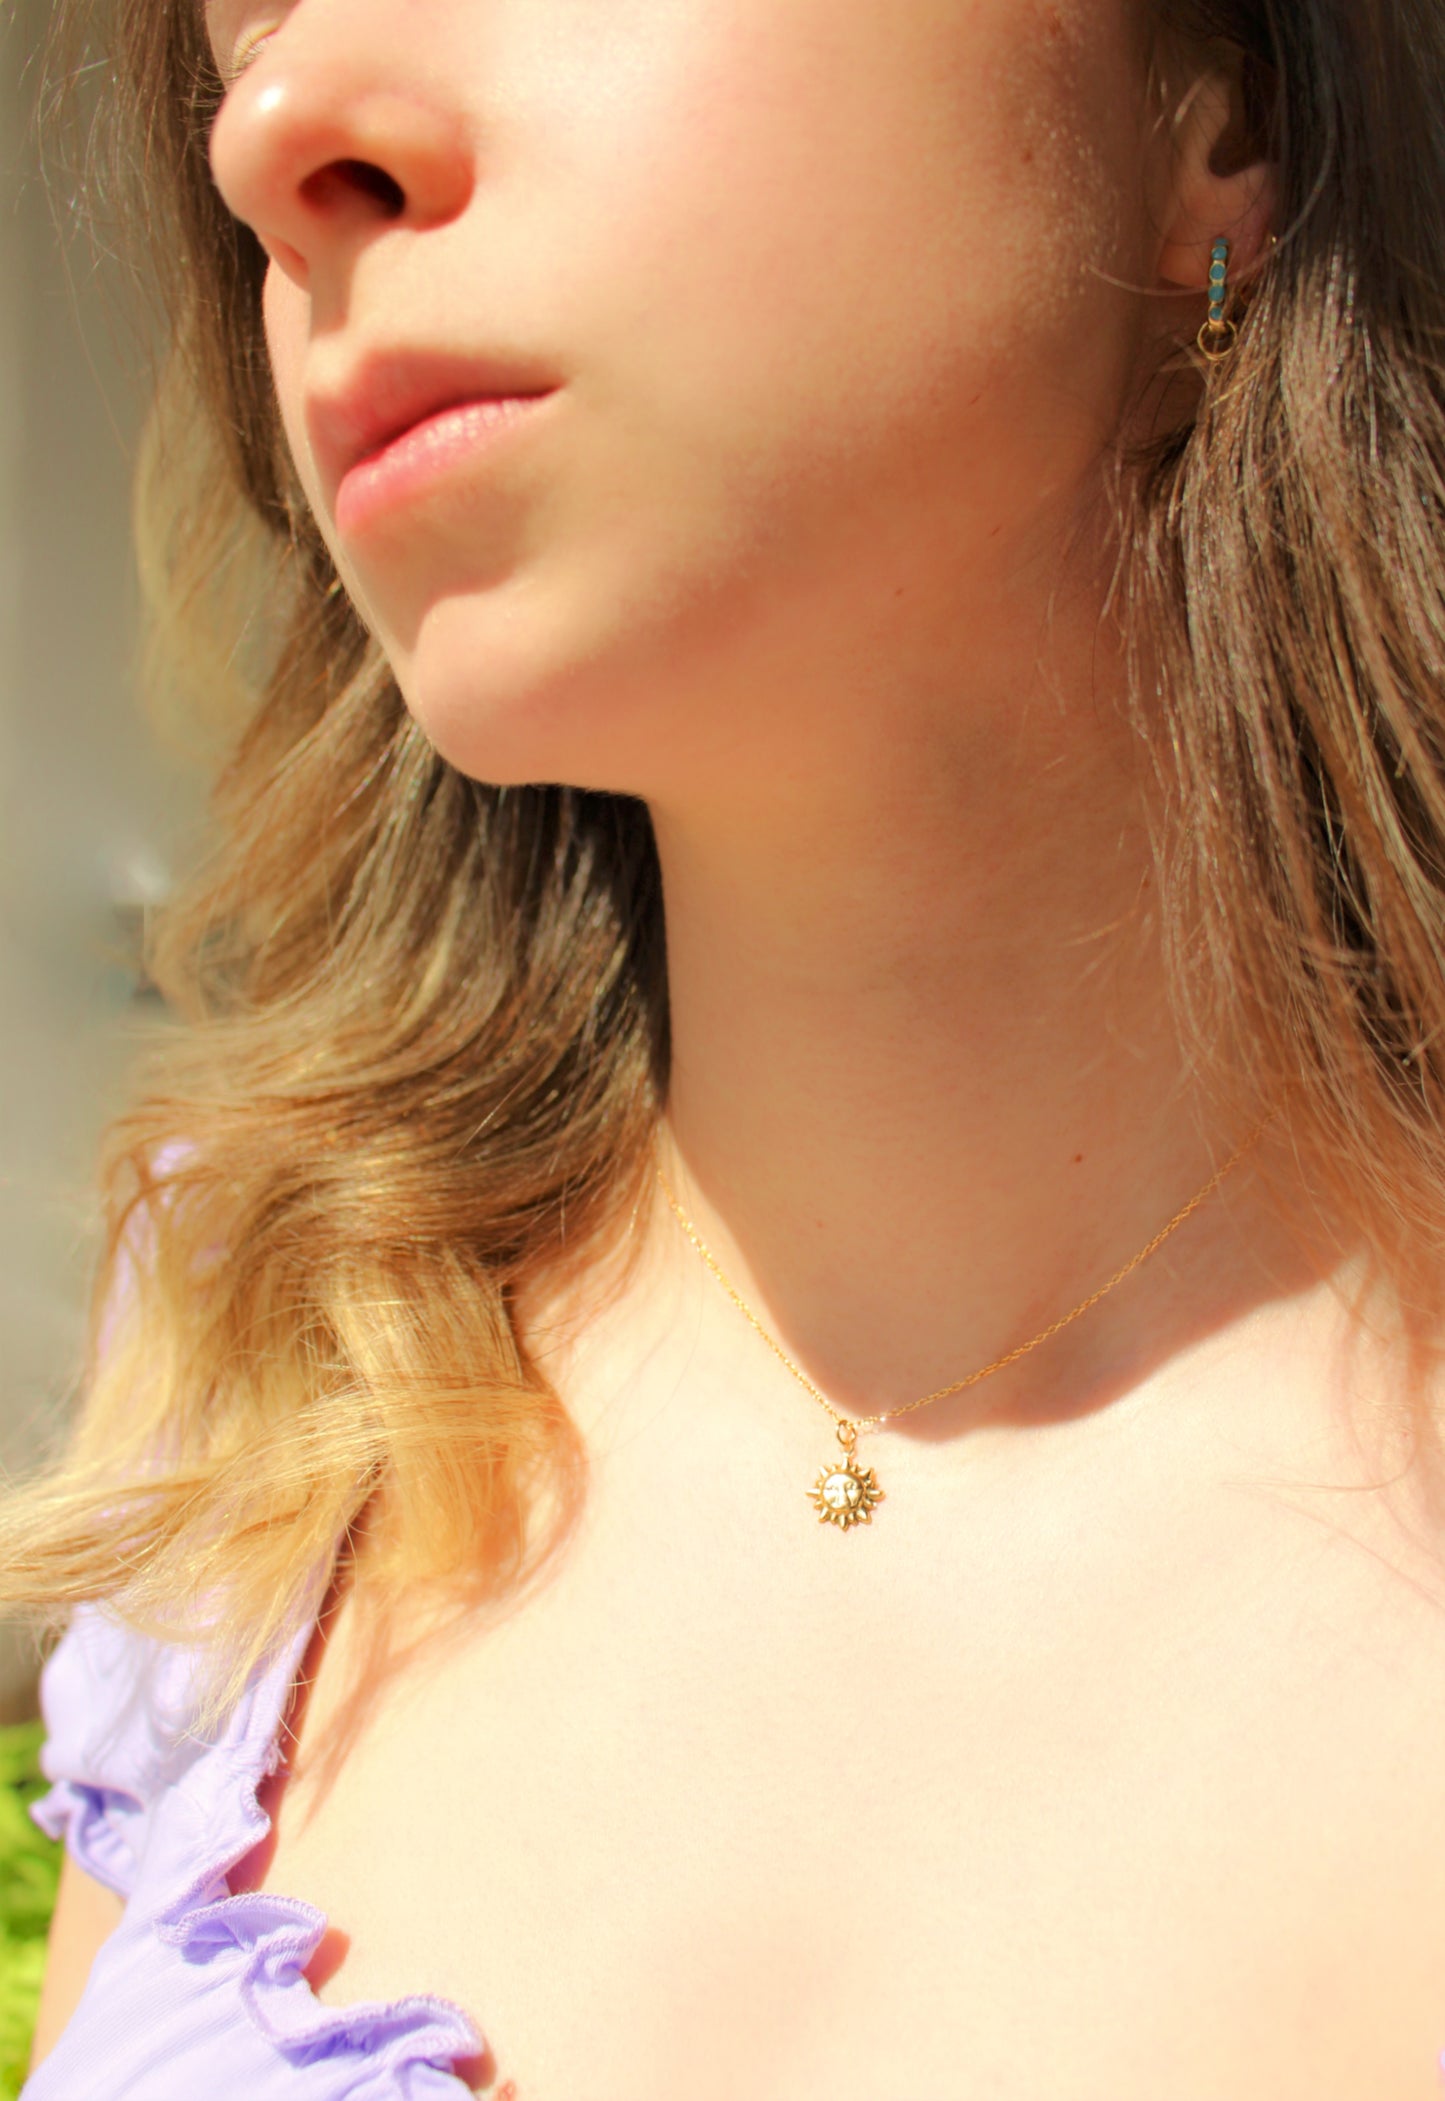 Smiling Sun - Necklace in 14k Gold Filled